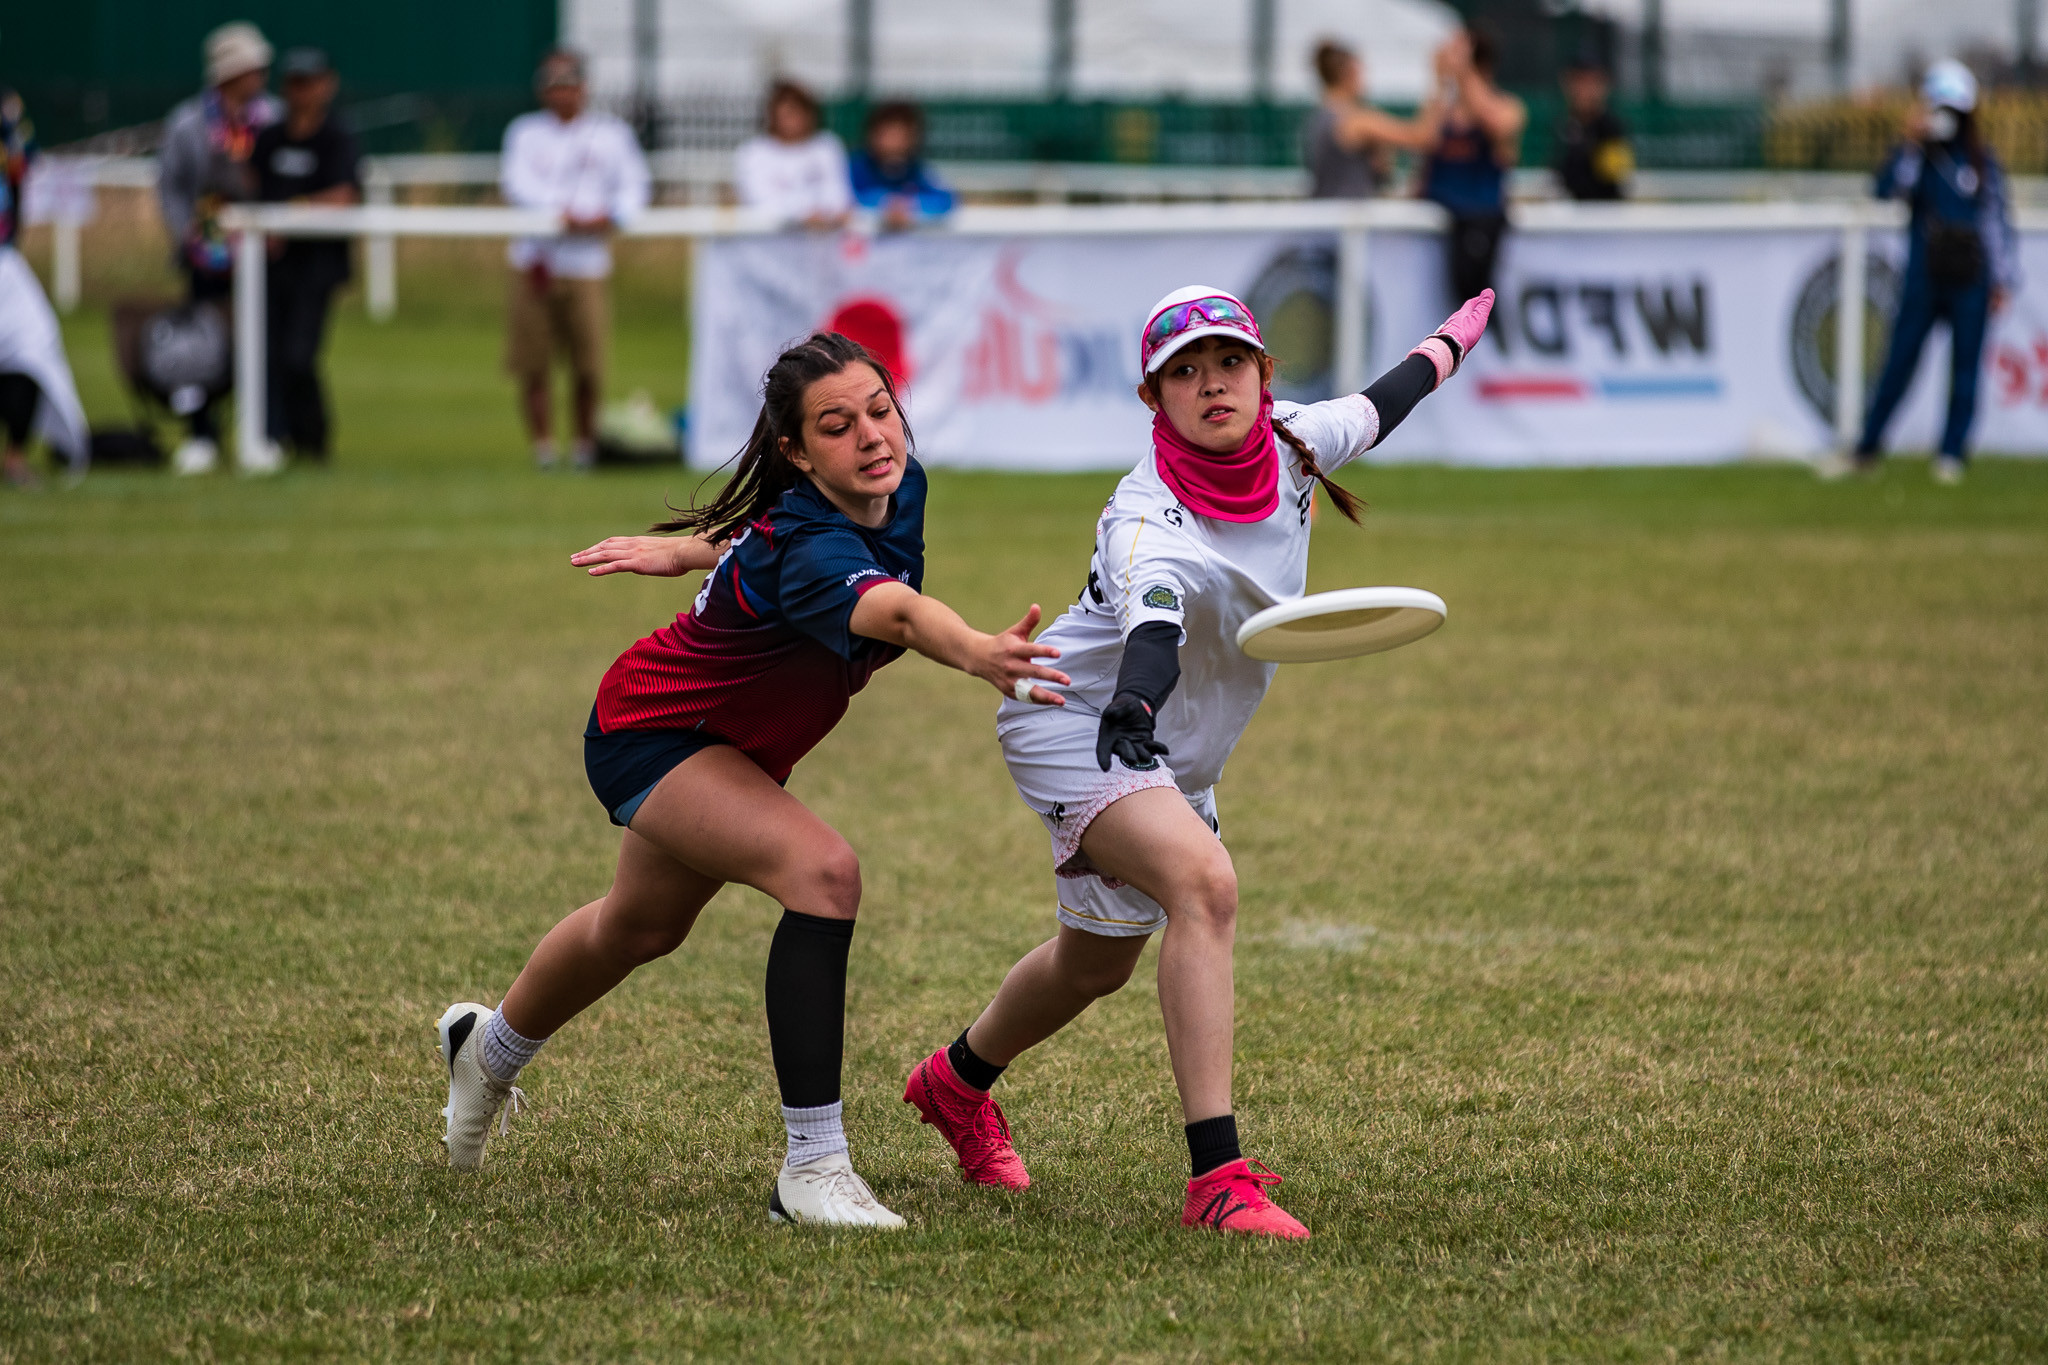 More than 1,000 players from 22 countries competed at the WFDF World Under-24 Ultimate Championships ©WFDF